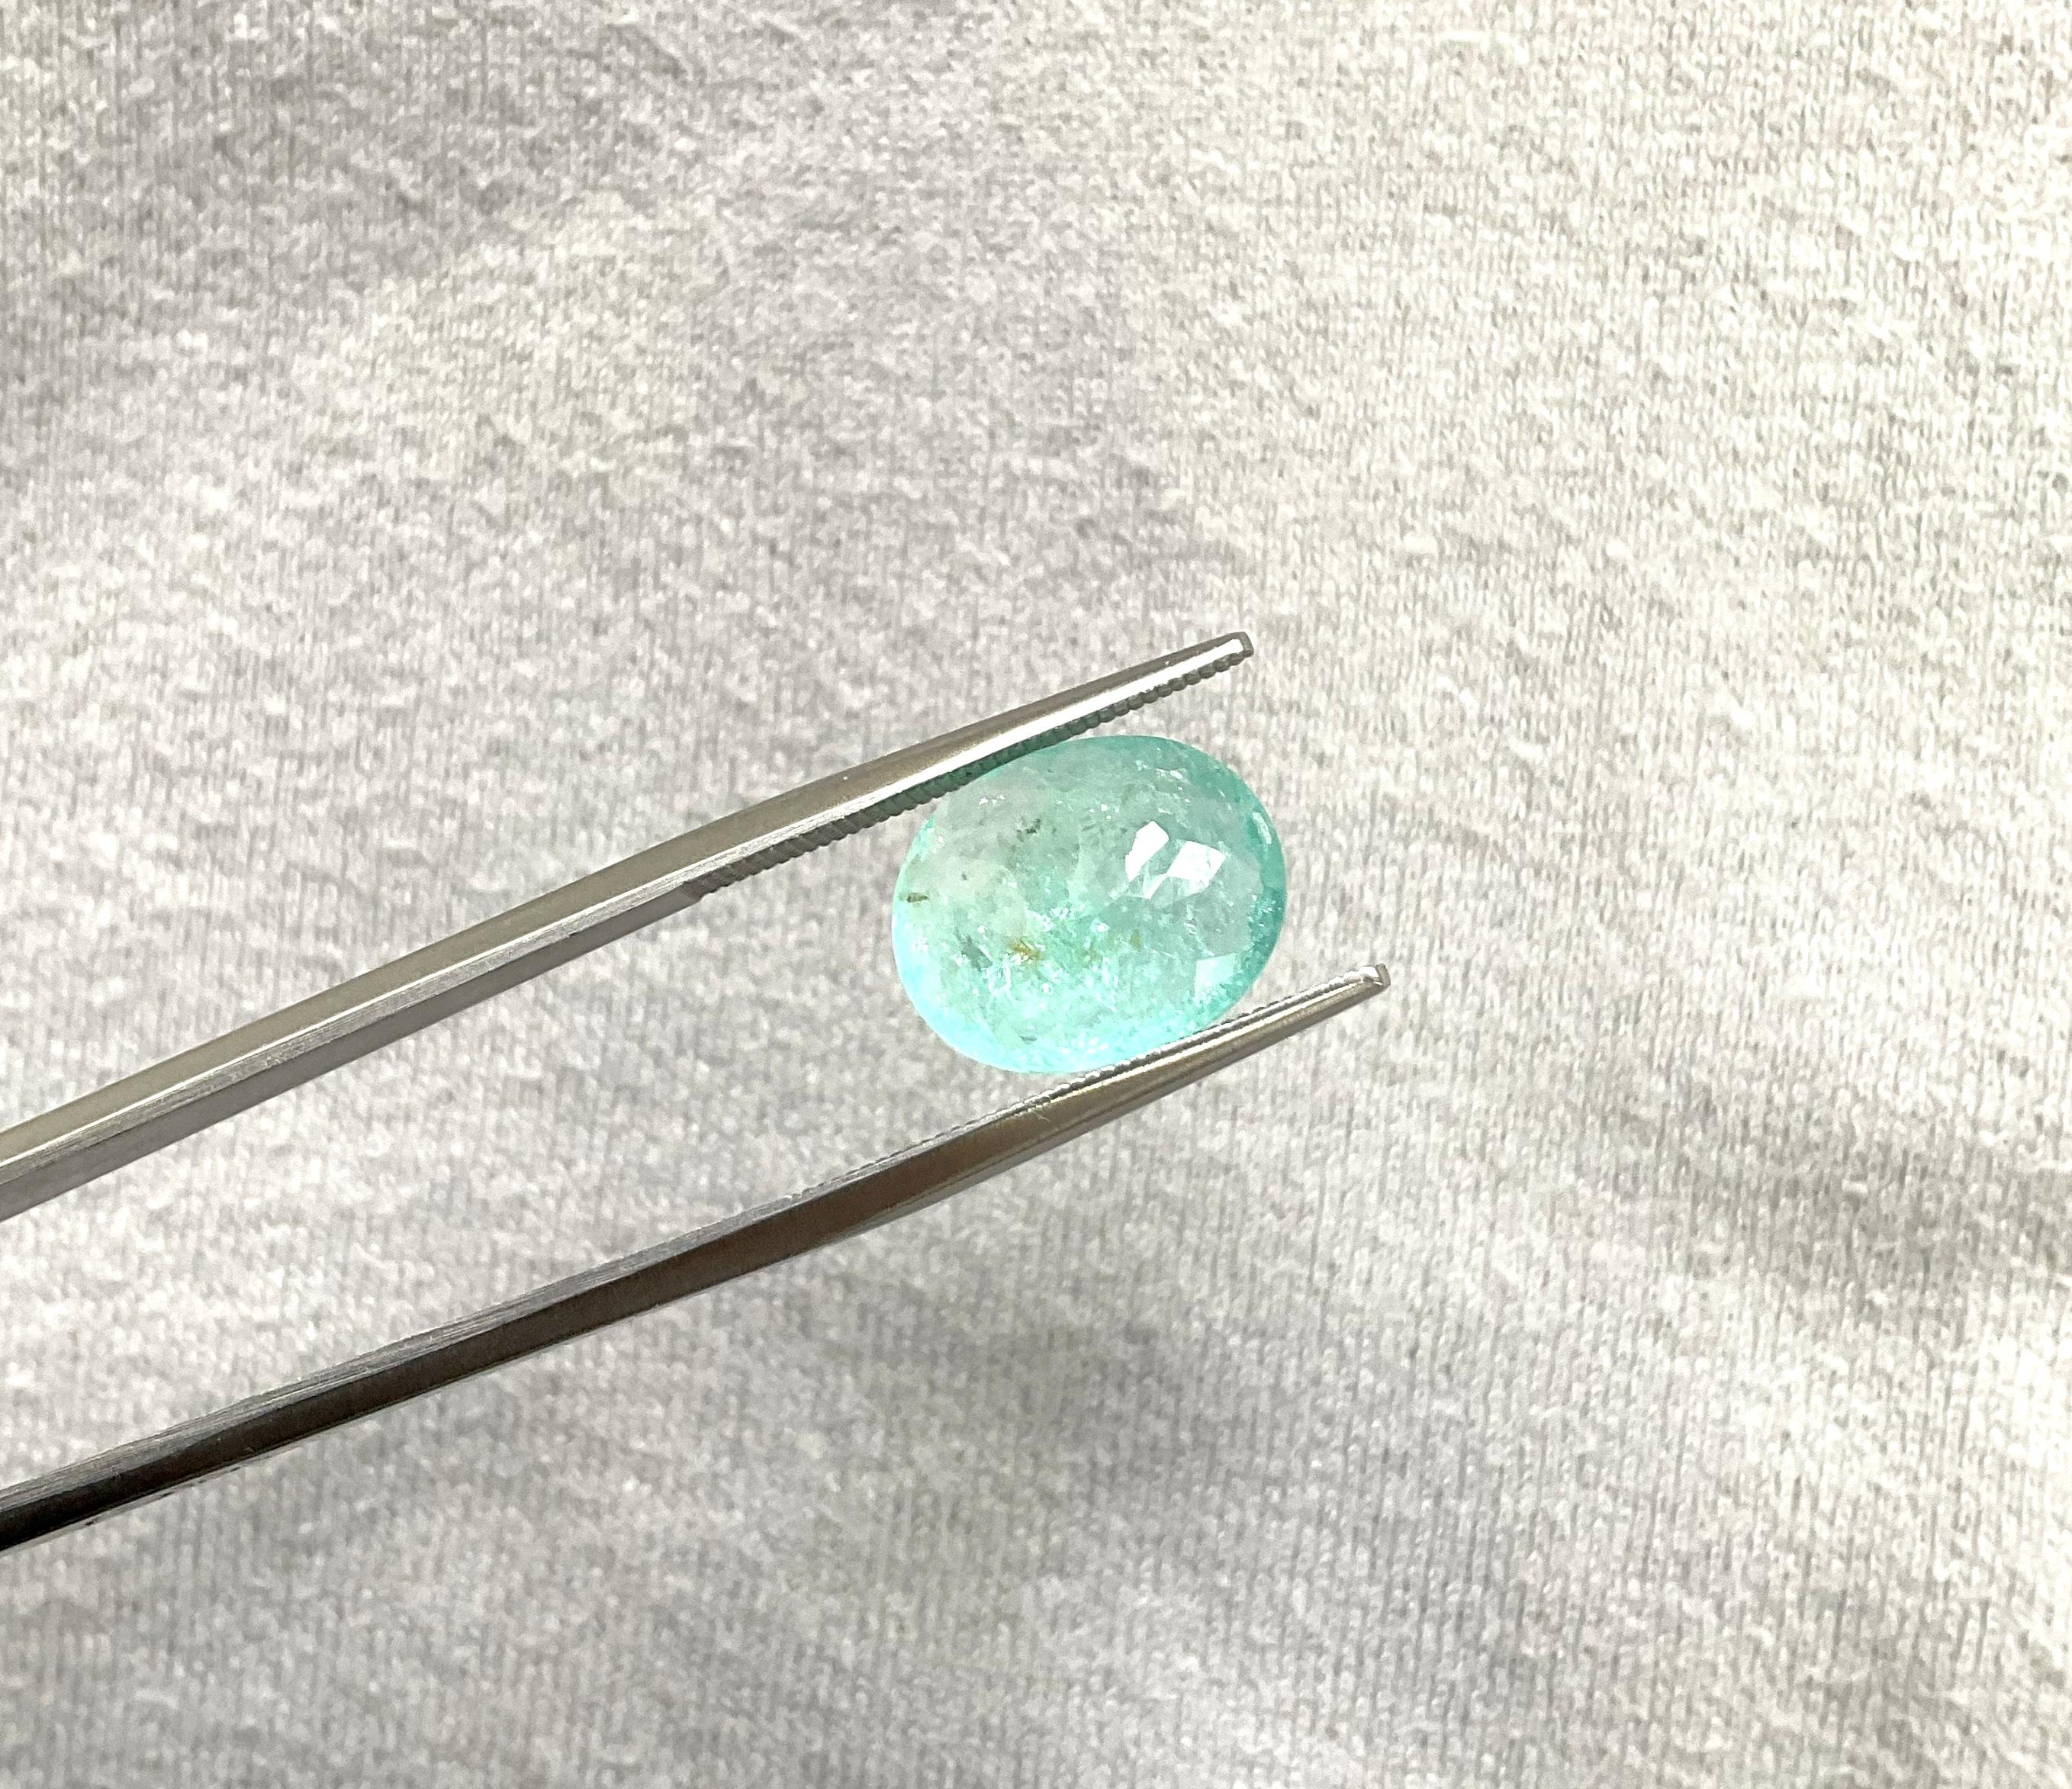 Certified 4.11 Carats Blue Paraiba Tourmaline Oval Cut Stone for Fine Jewelry For Sale 1